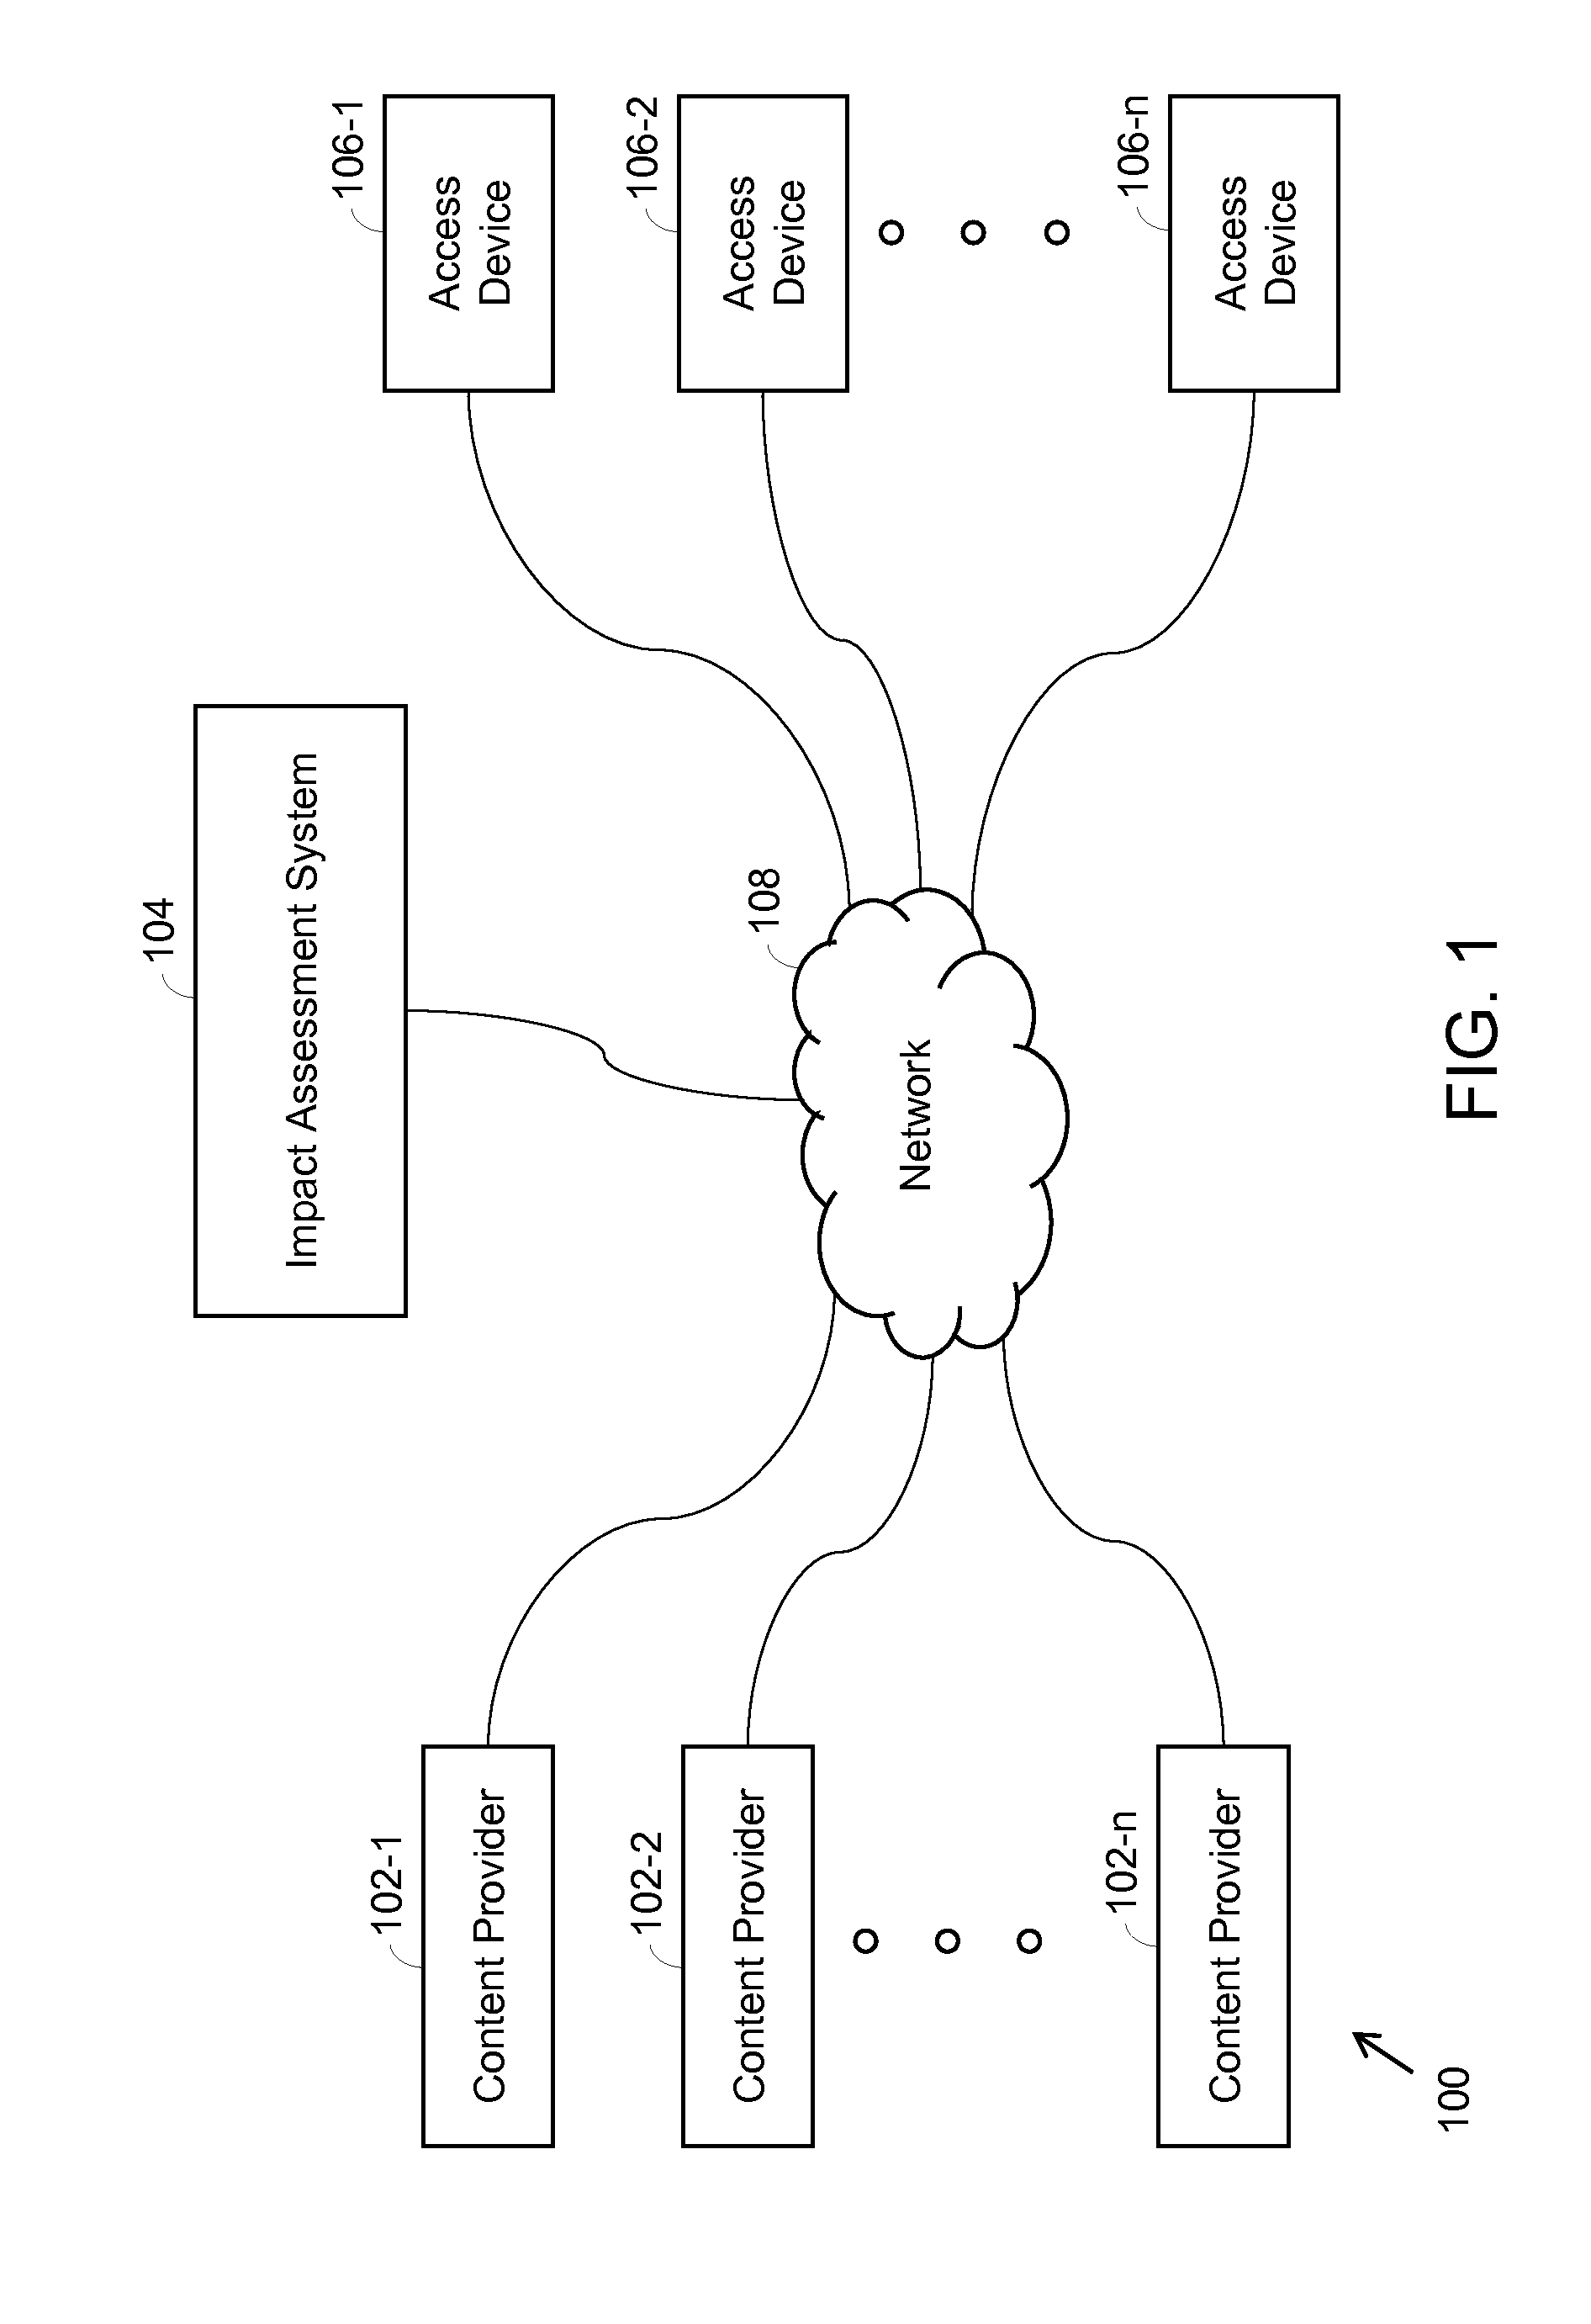 Method and system for automated content analysis for a business organization